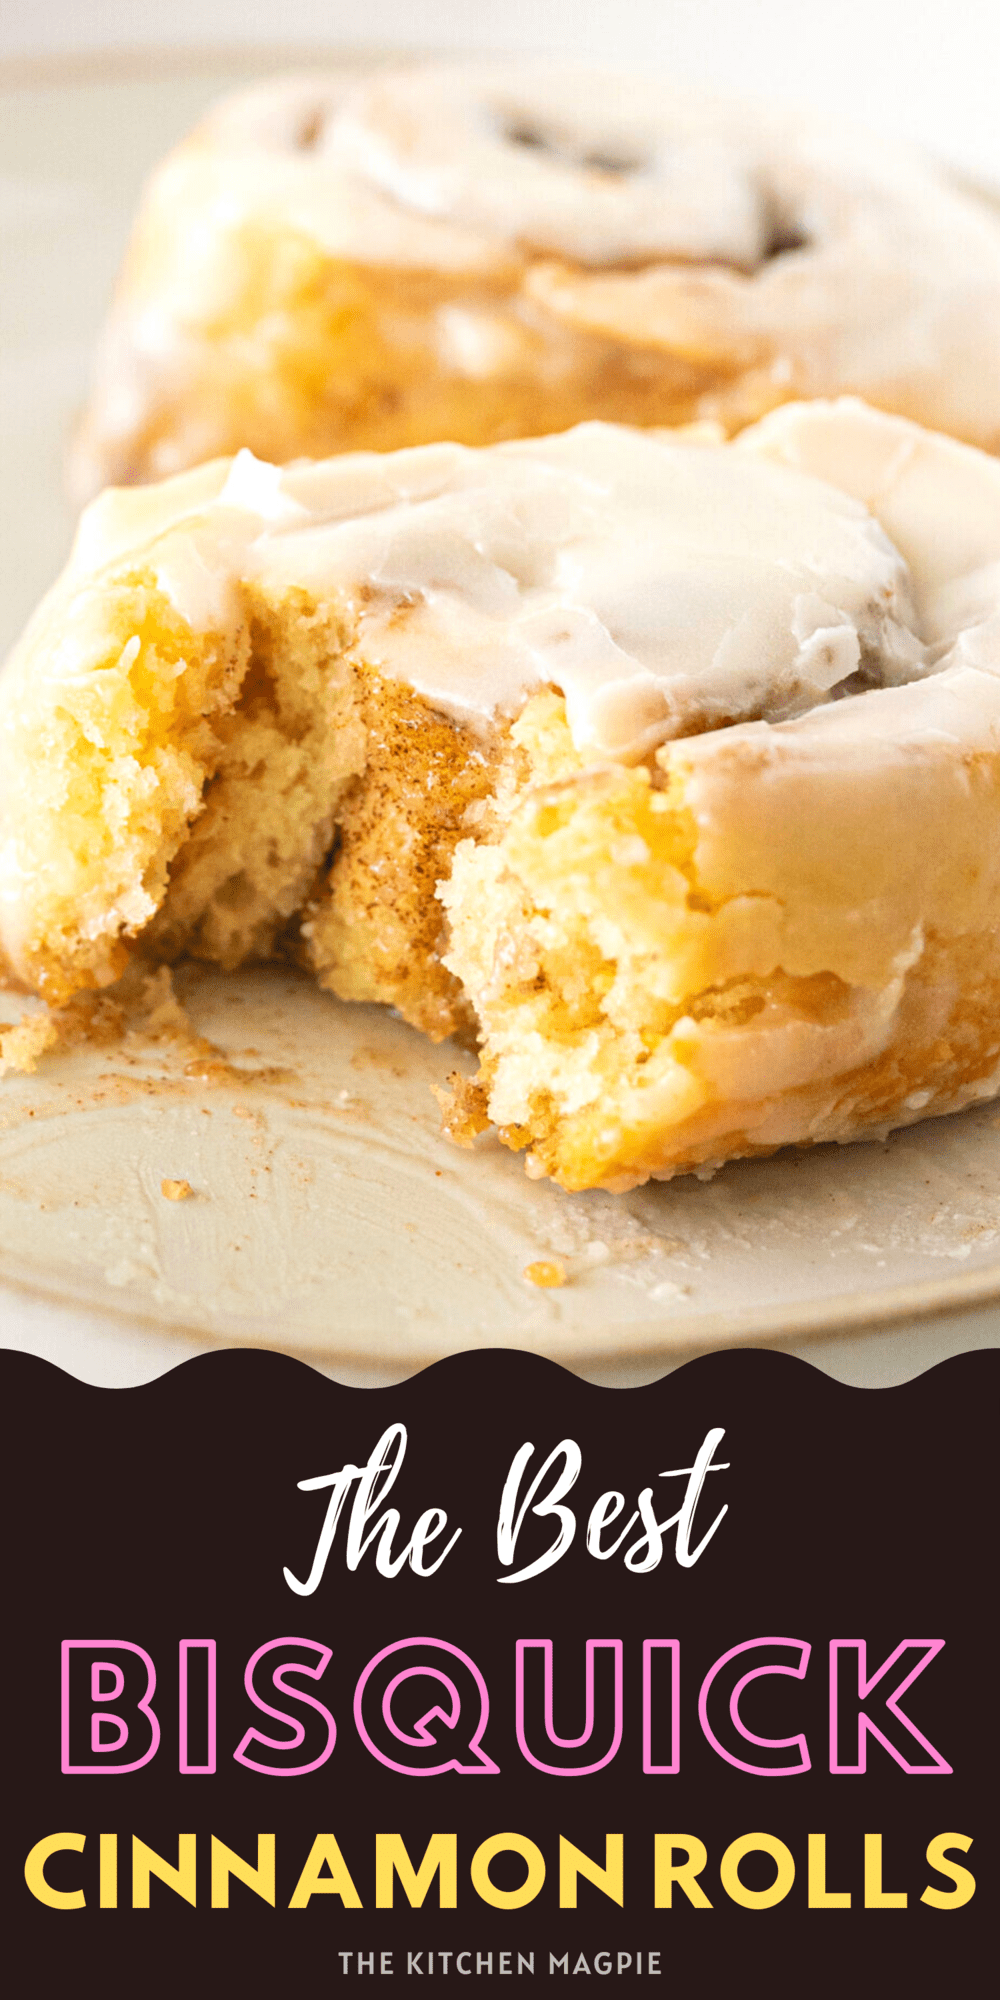 These fast and easy Bisquick™ Cinnamon Rolls were one of the first things I learned to bake as a kid and they remain just as delicious today.